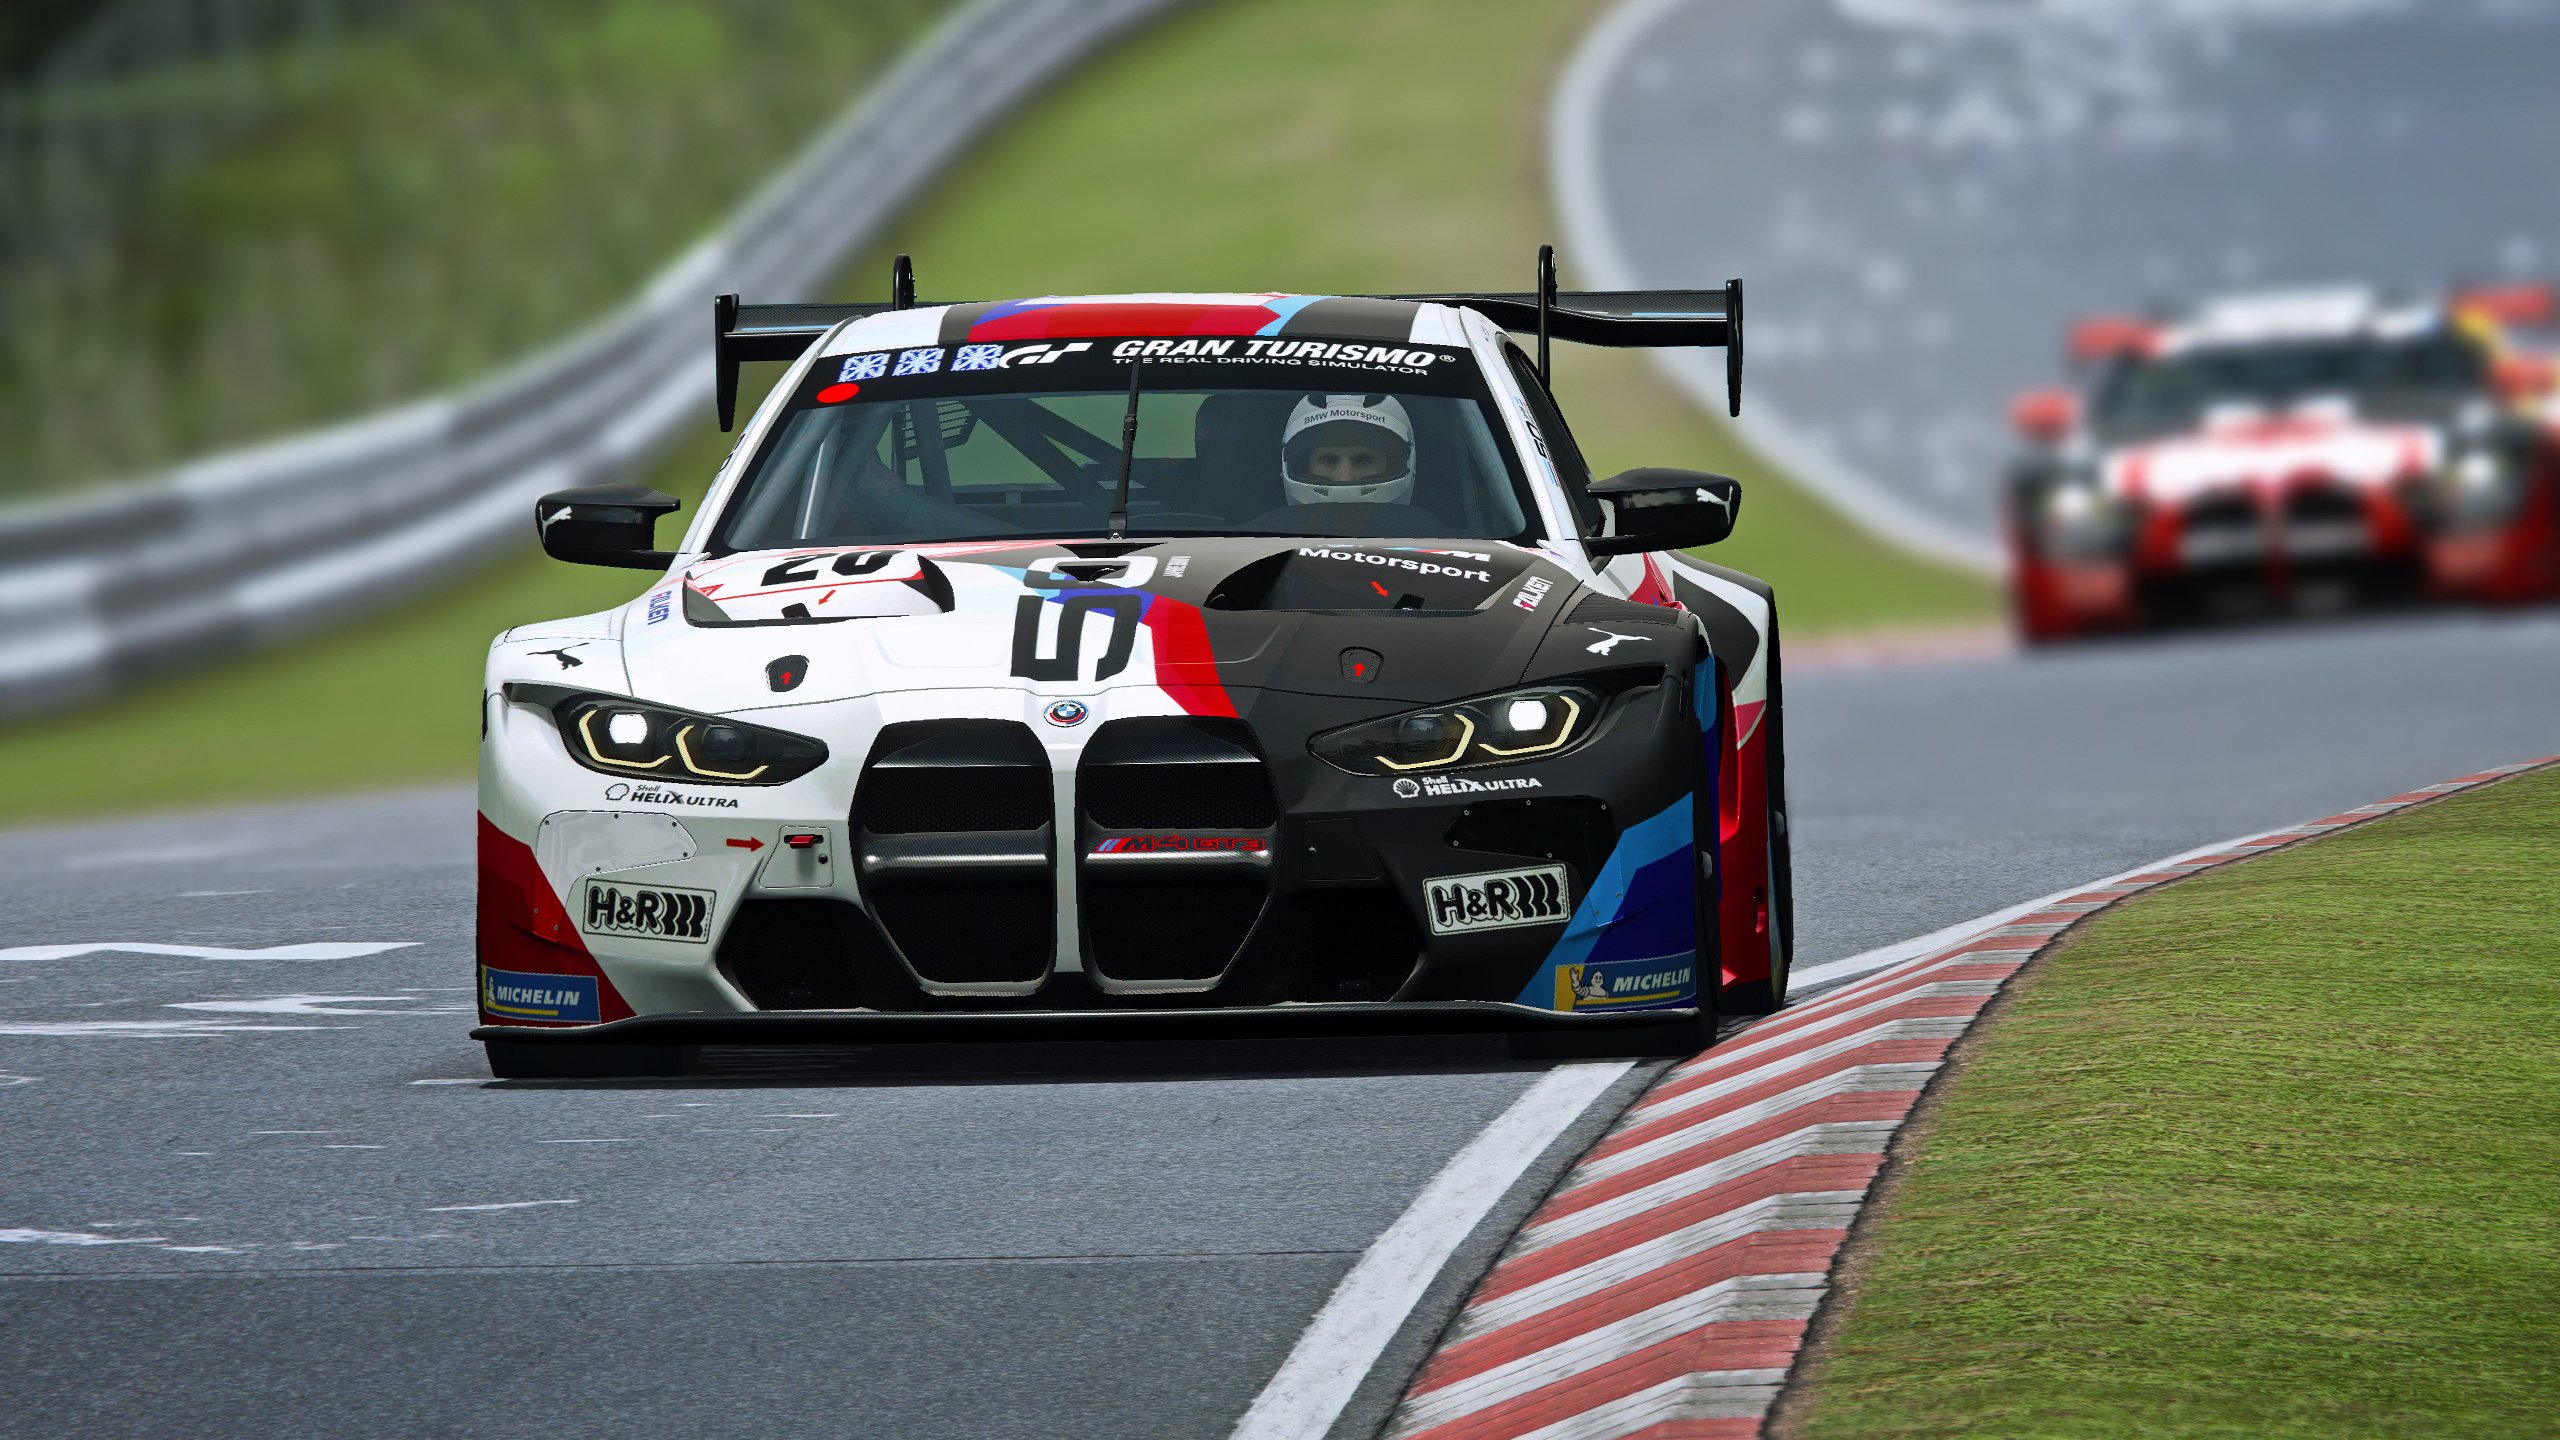 More information about "RaceRoom Racing Experience: disponibile la nuova BMW M4 GT3"